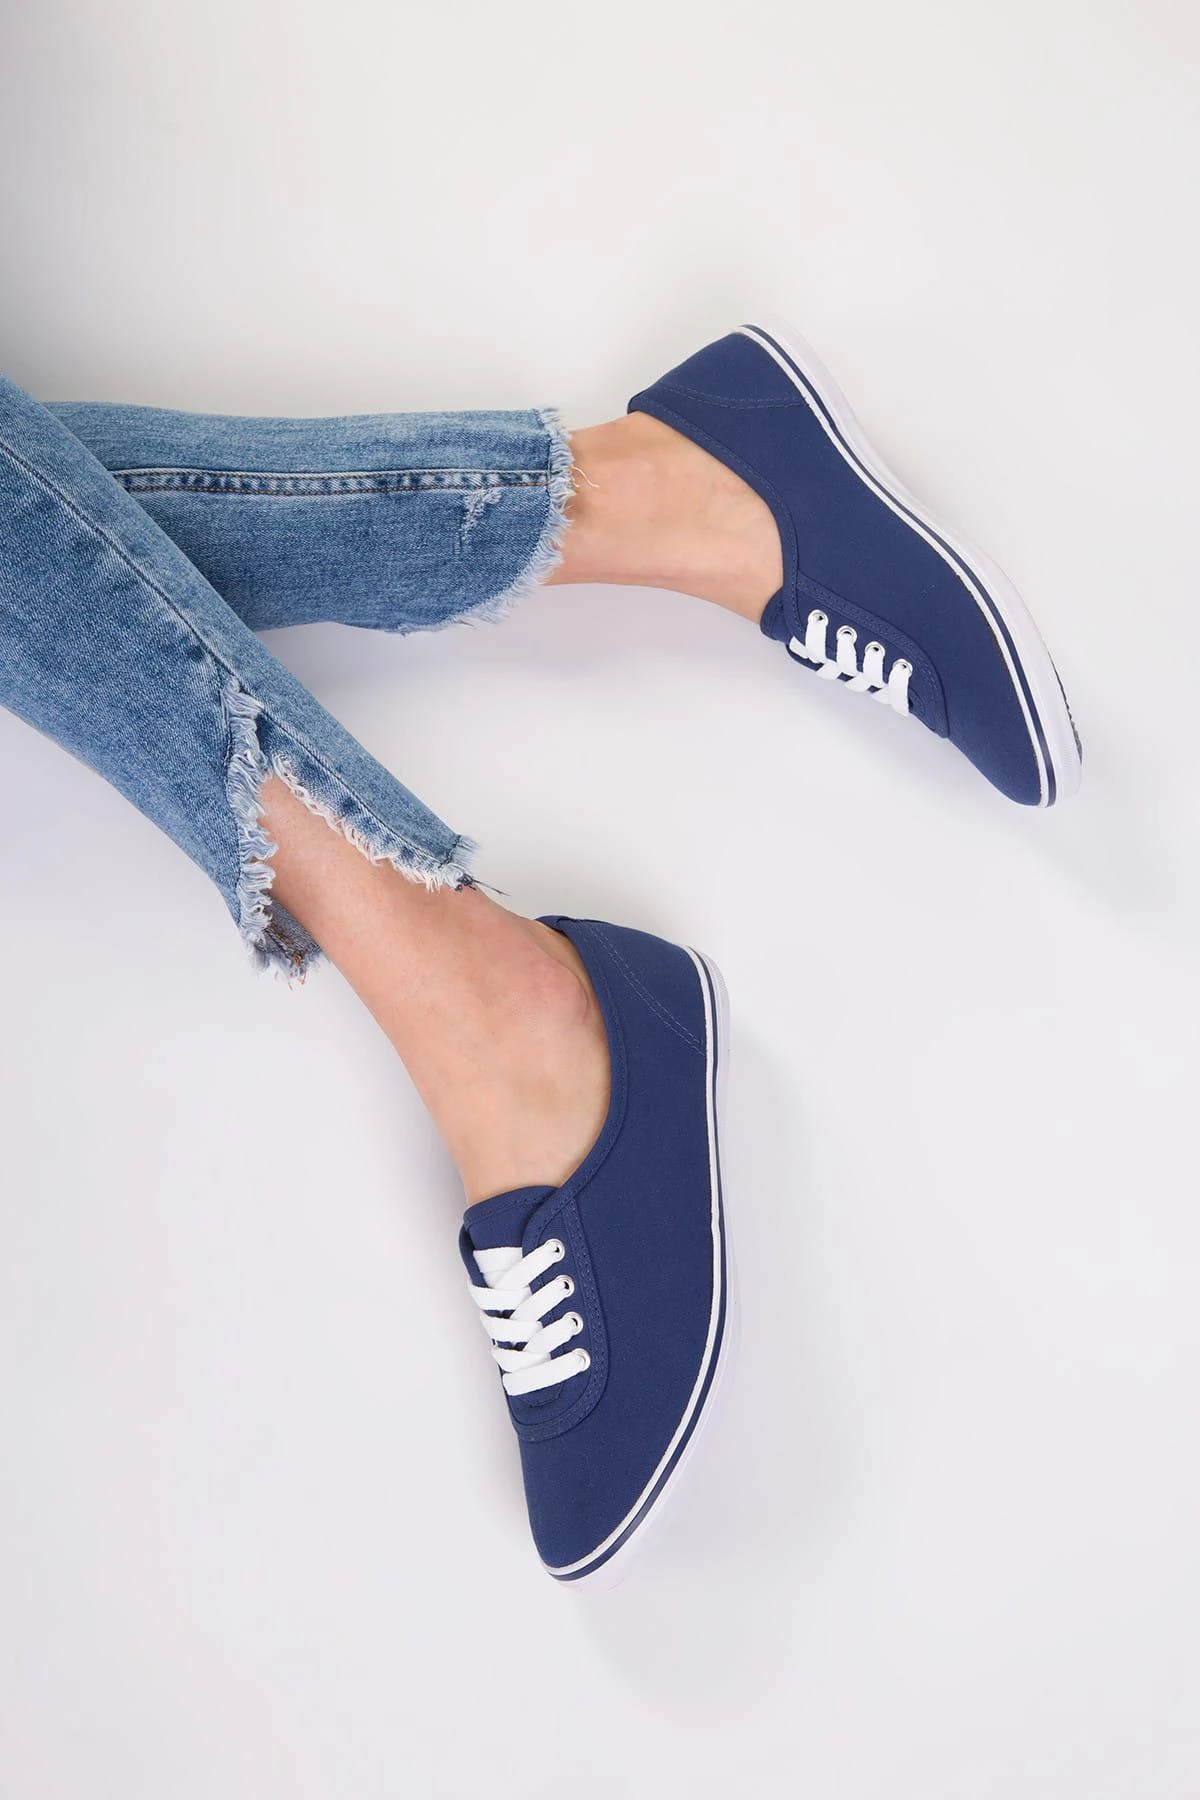 navy blue womens slip on shoes